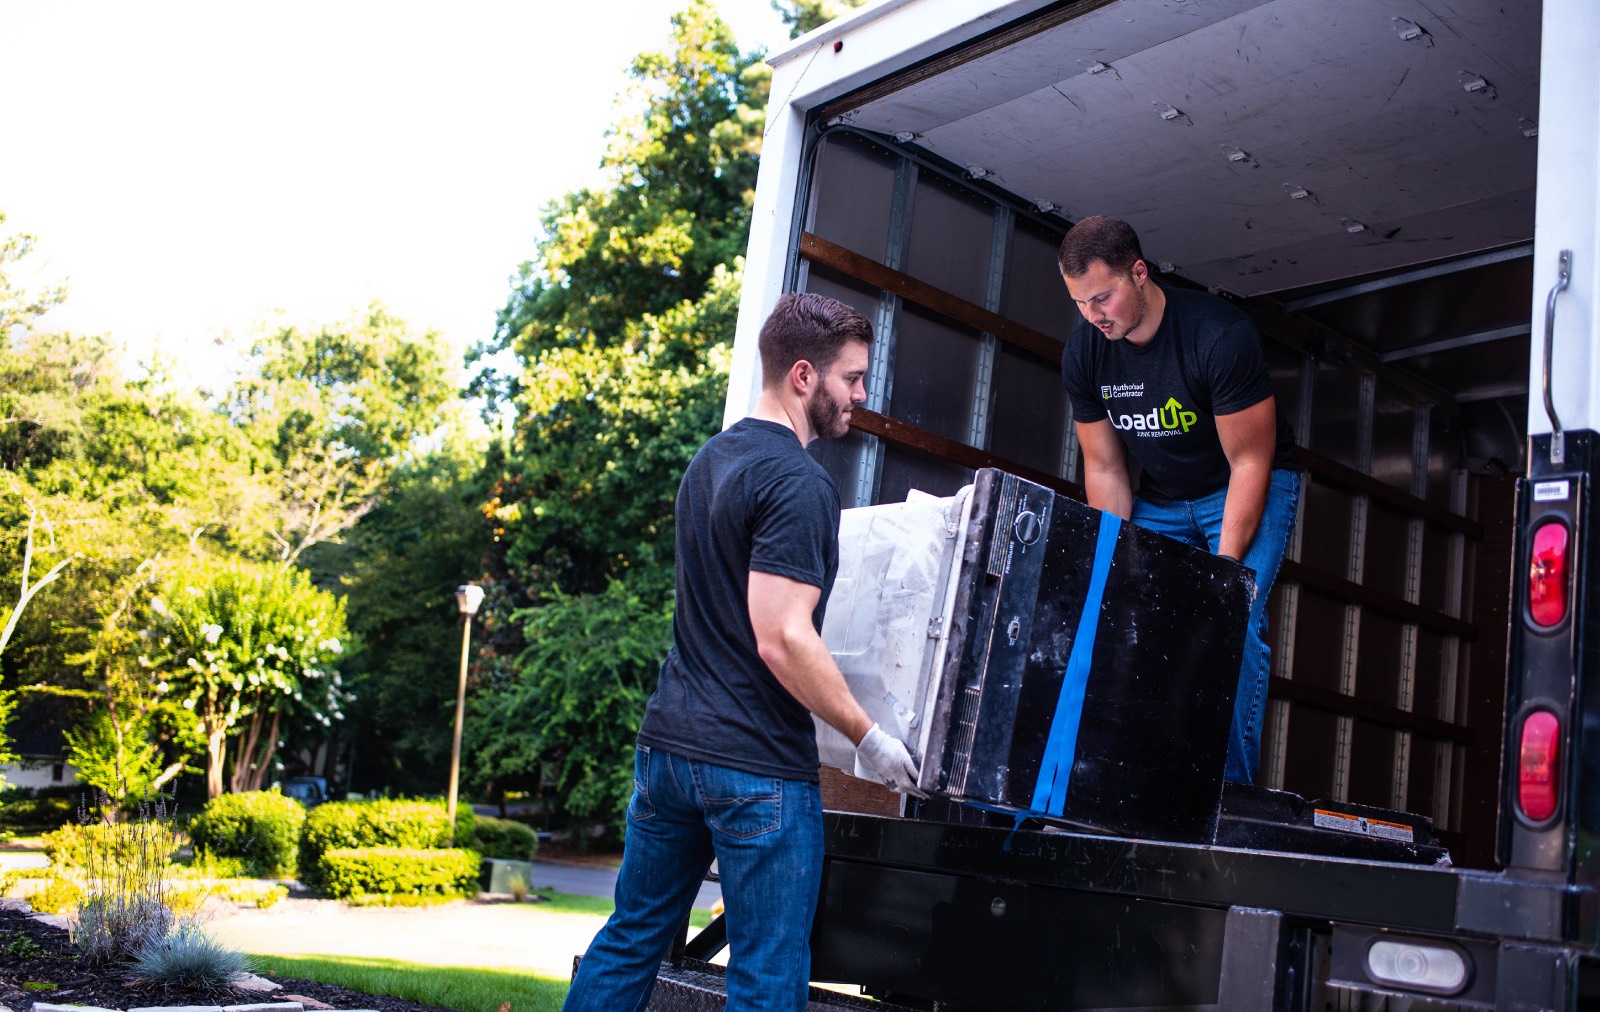 LoadUp is the only junk removal company that uses crowdsourcing to recruit independent licensed, insured haulers.